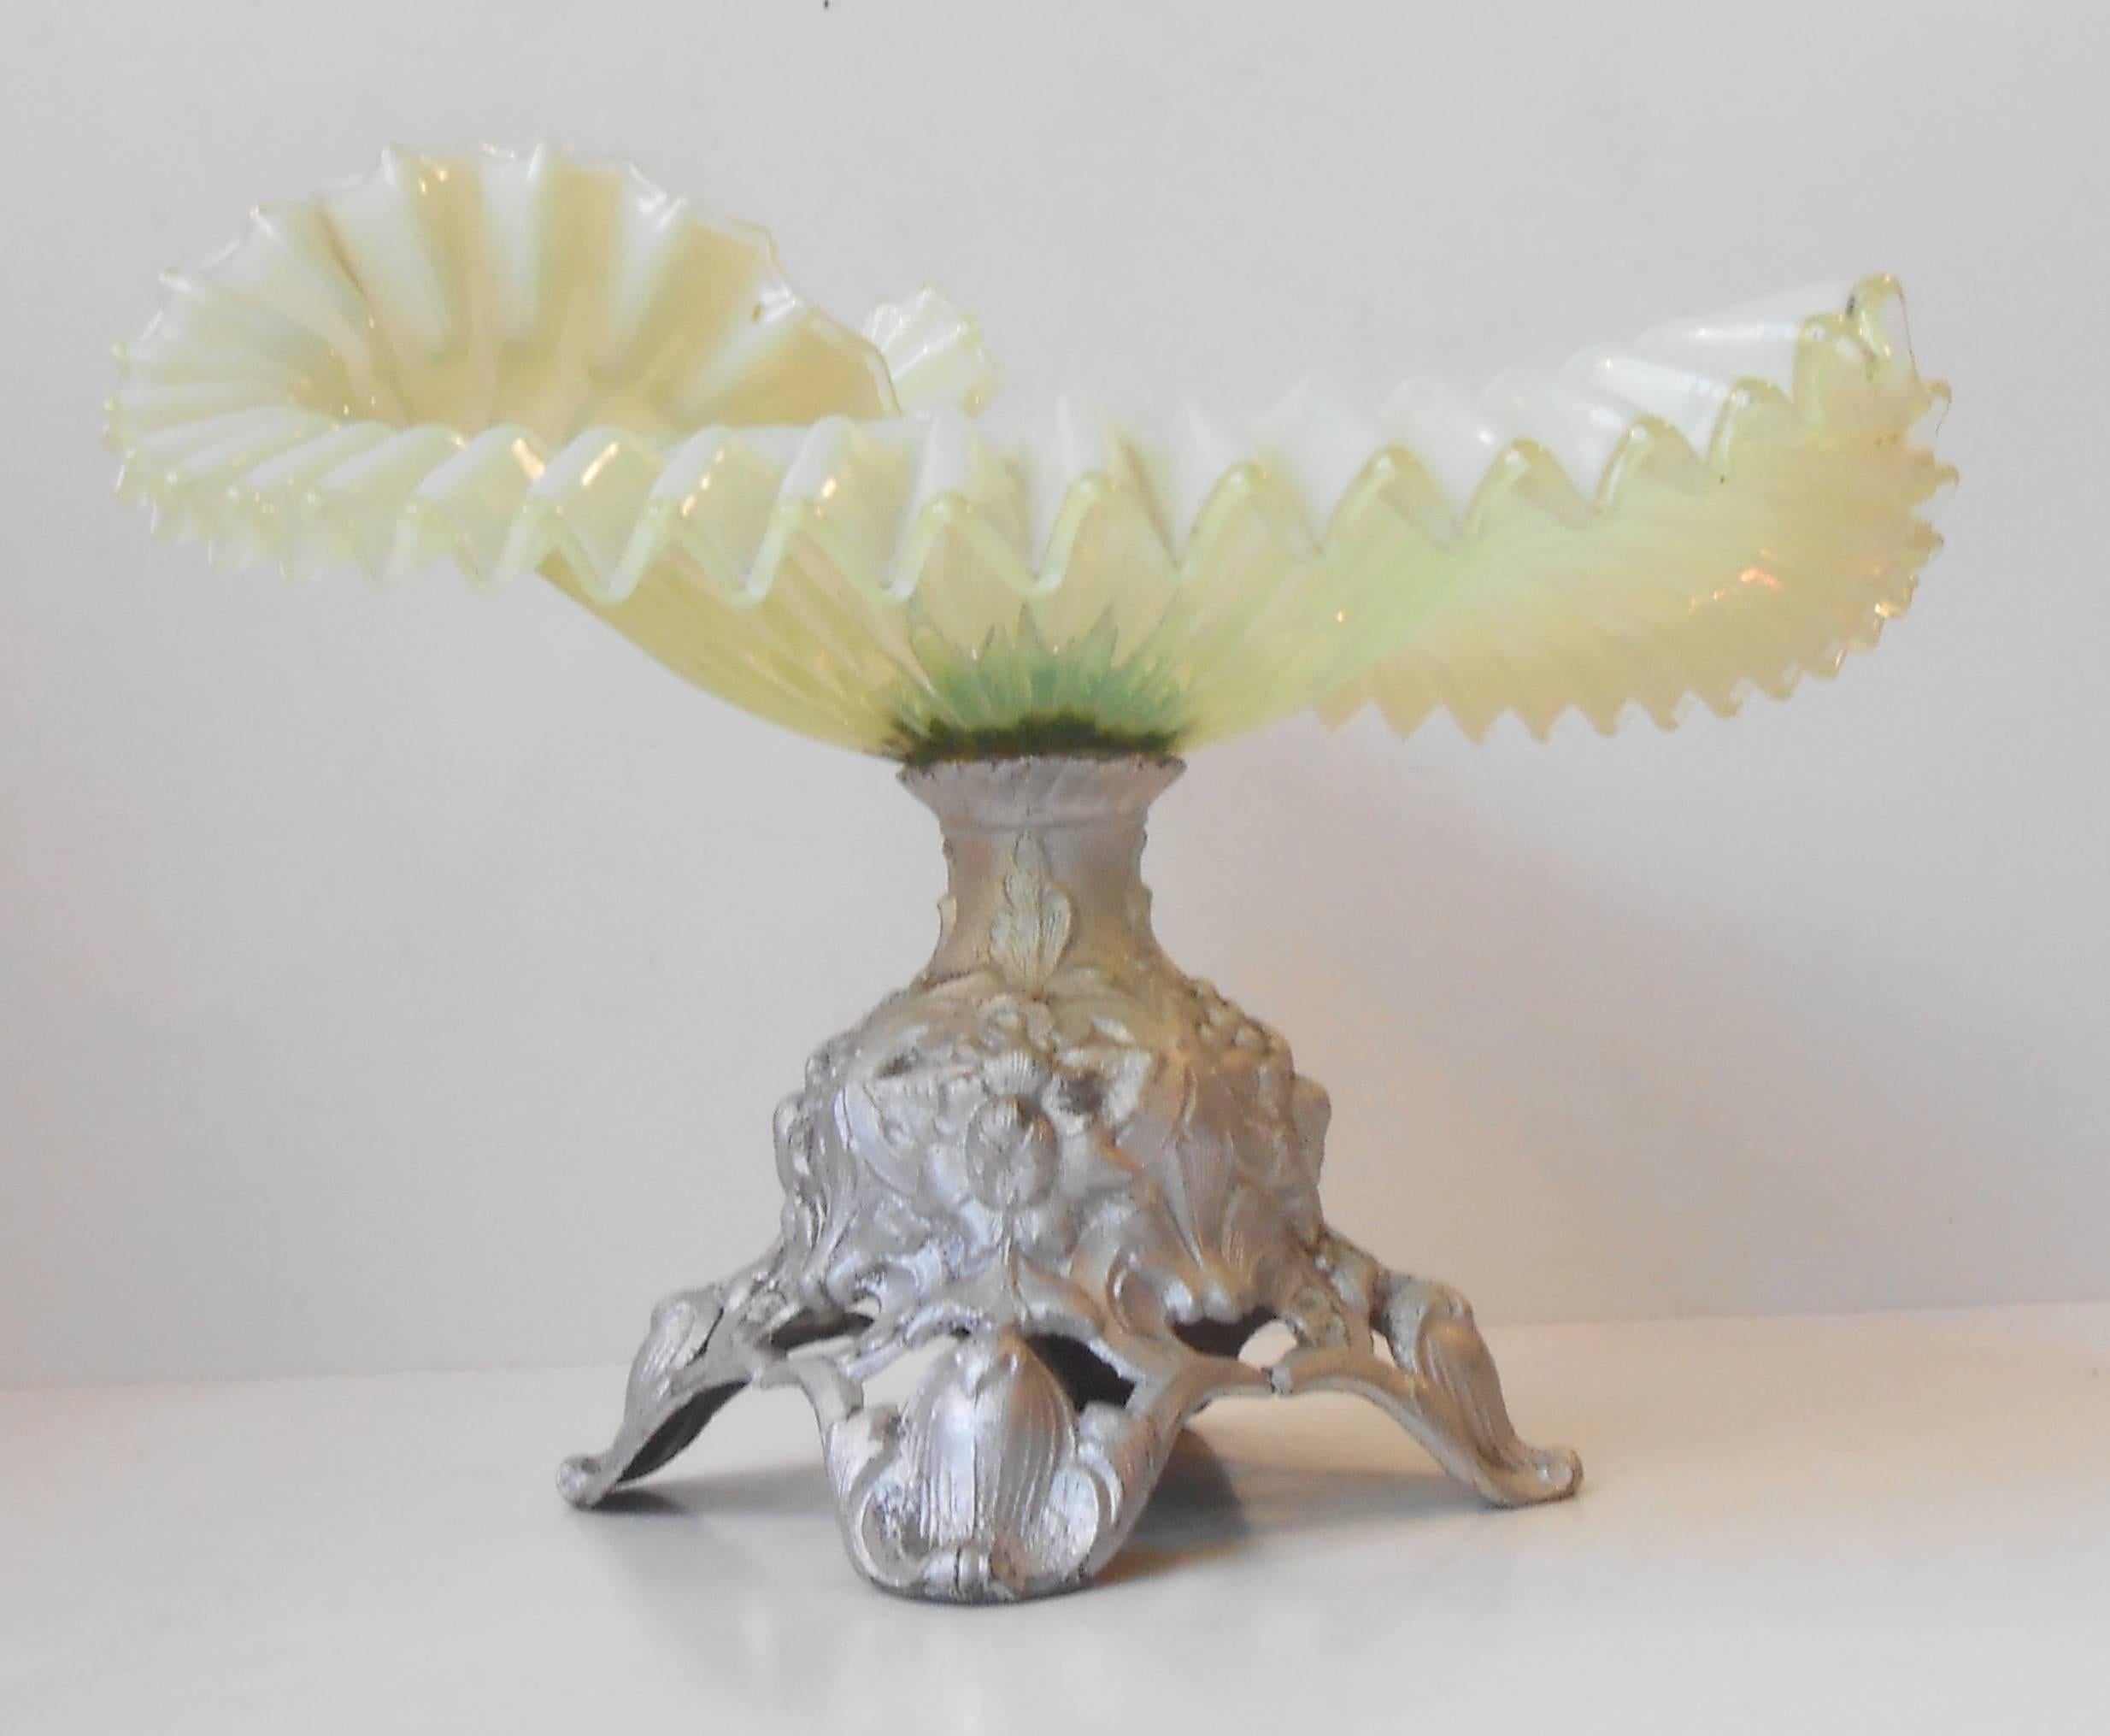 Very rare antique bowl with contrasting delicate lime-green opalescent fluted and curvy glass on a wrought iron pedestal base, French maker, circa 1900. Intact and clean antique condition. Please note the base has been re-painted at some point.